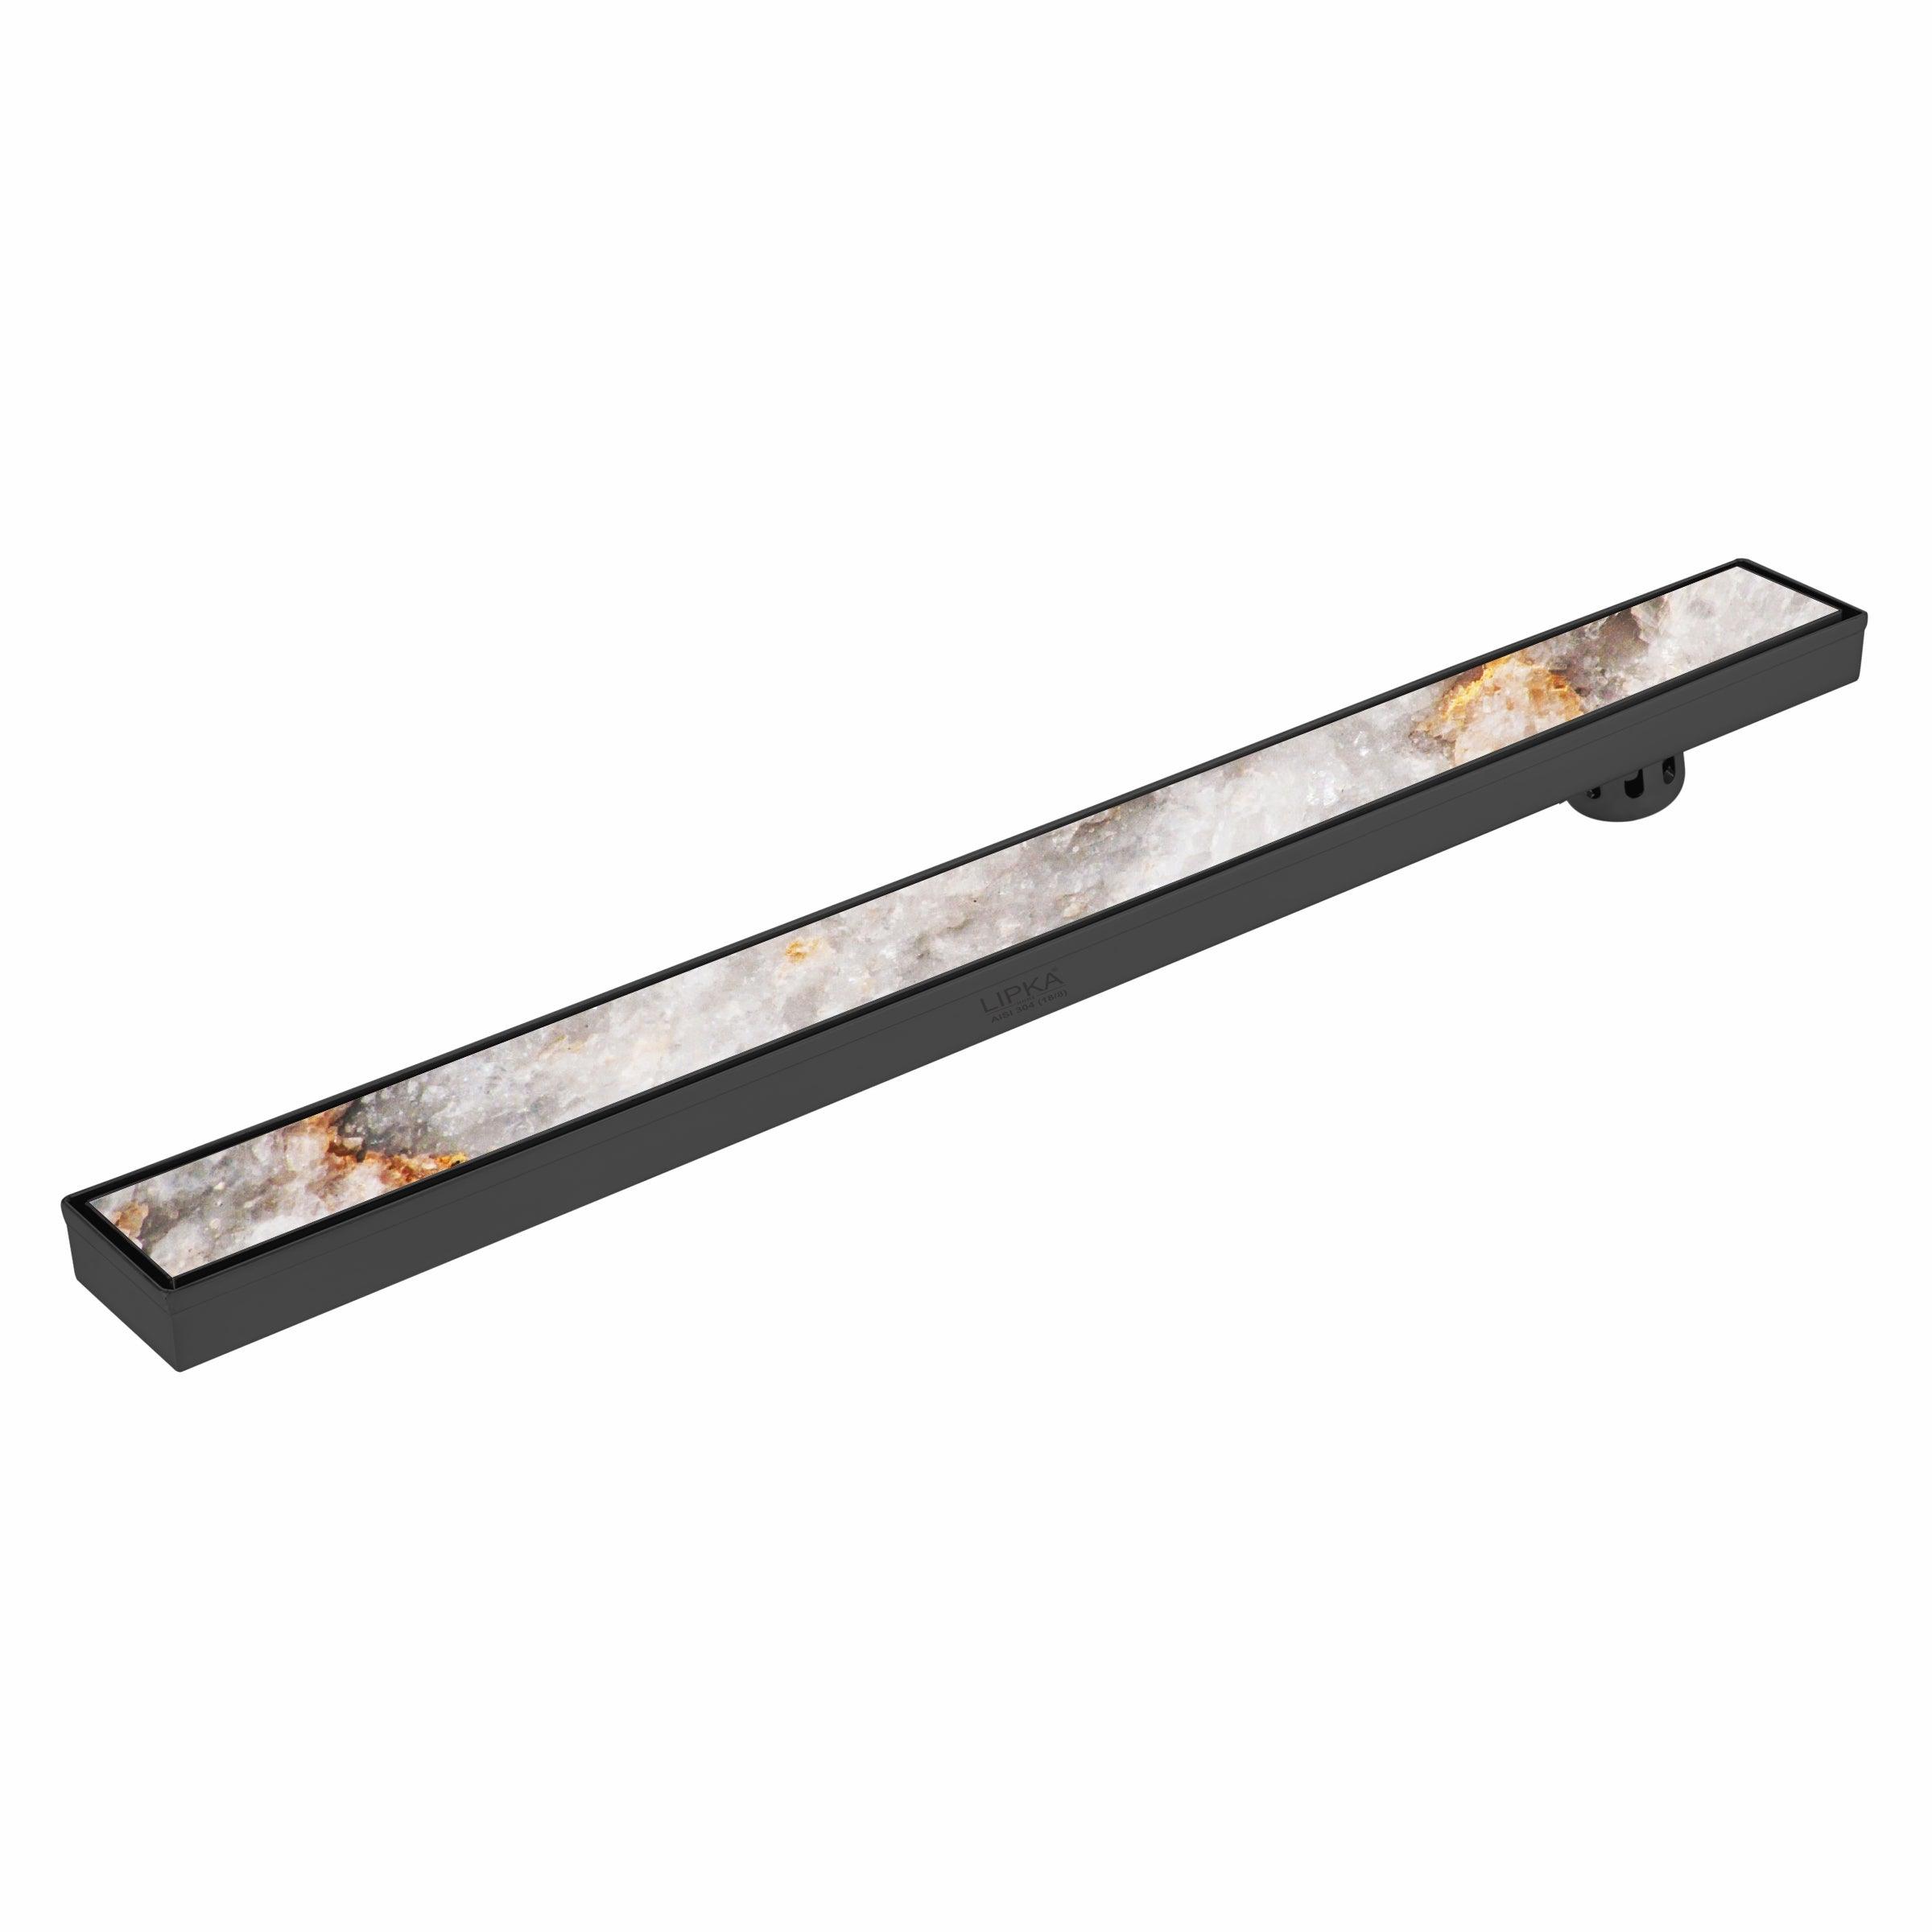 Tile Insert Shower Drain Channel - Black (40 x 3 Inches)